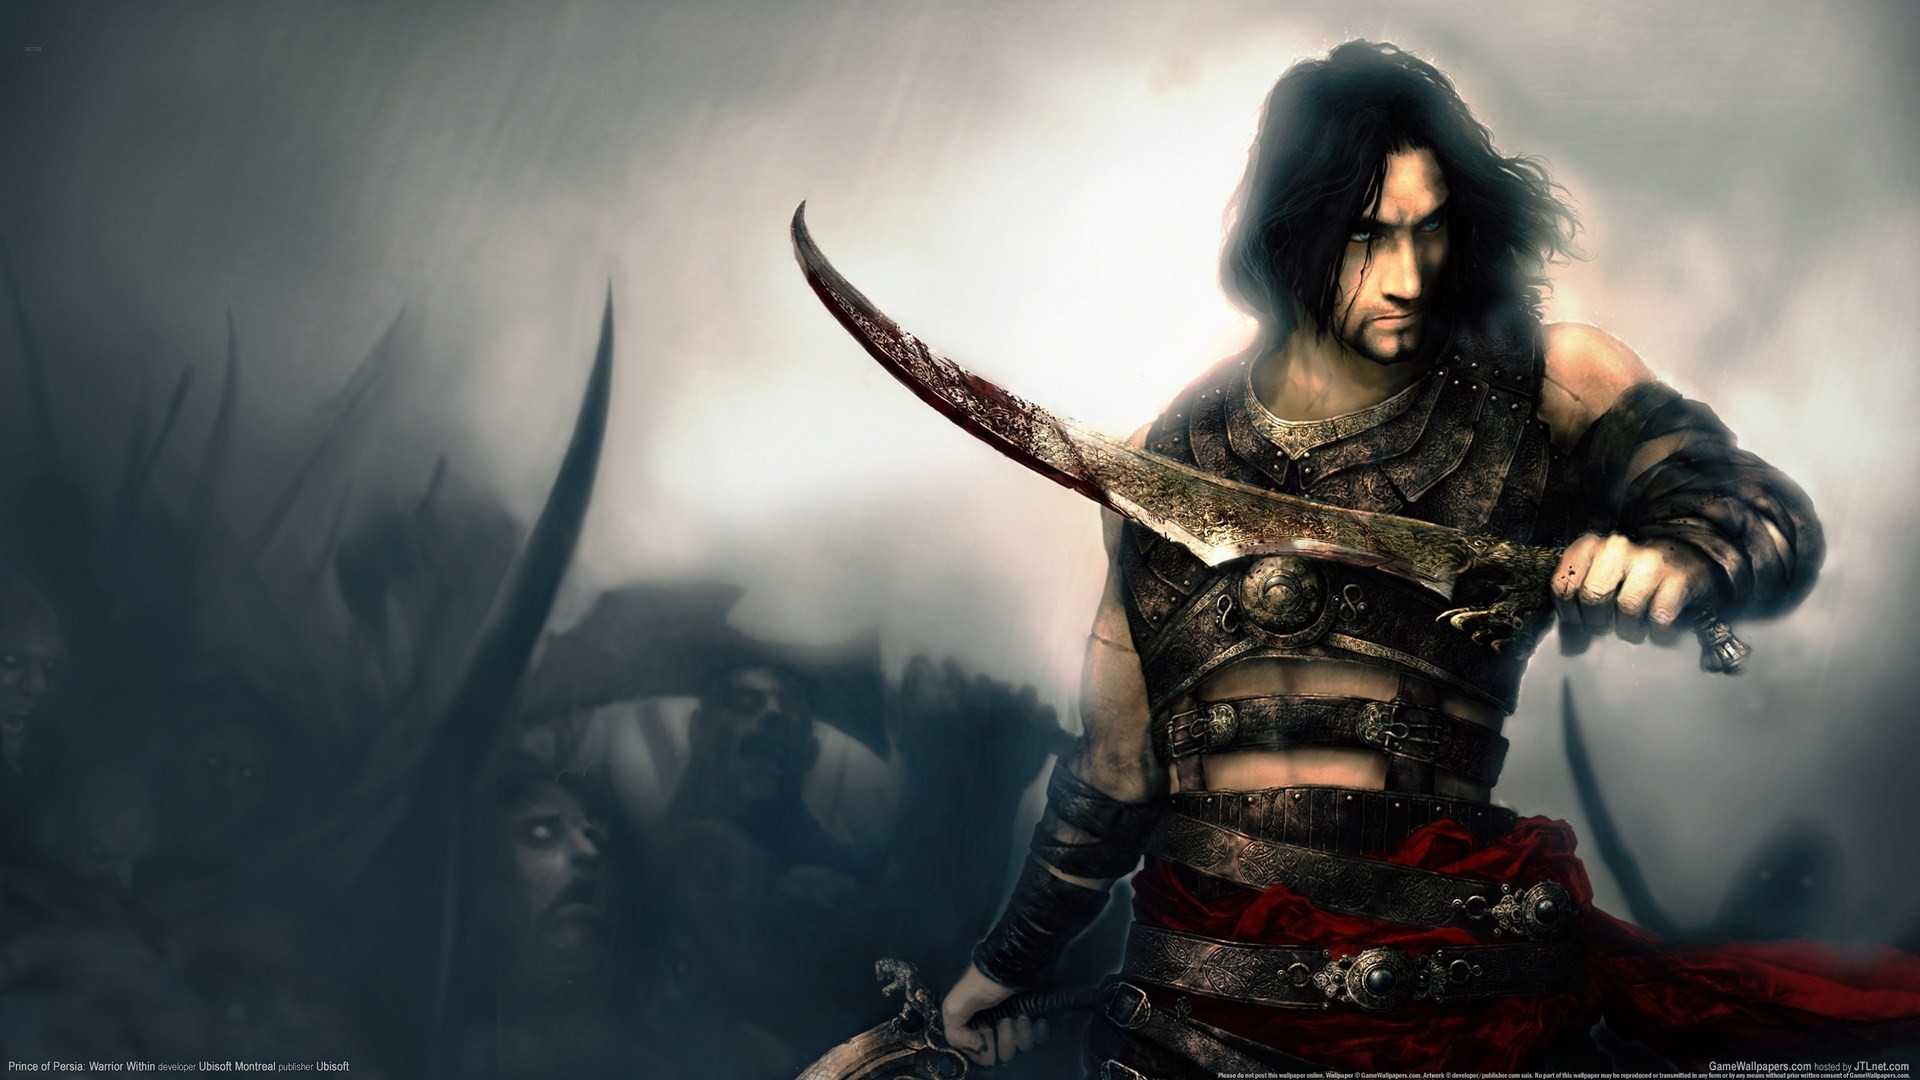 1920x1080 Kemp Nail - HD Widescreen Wallpapers - prince of persia warrior within  image -  px